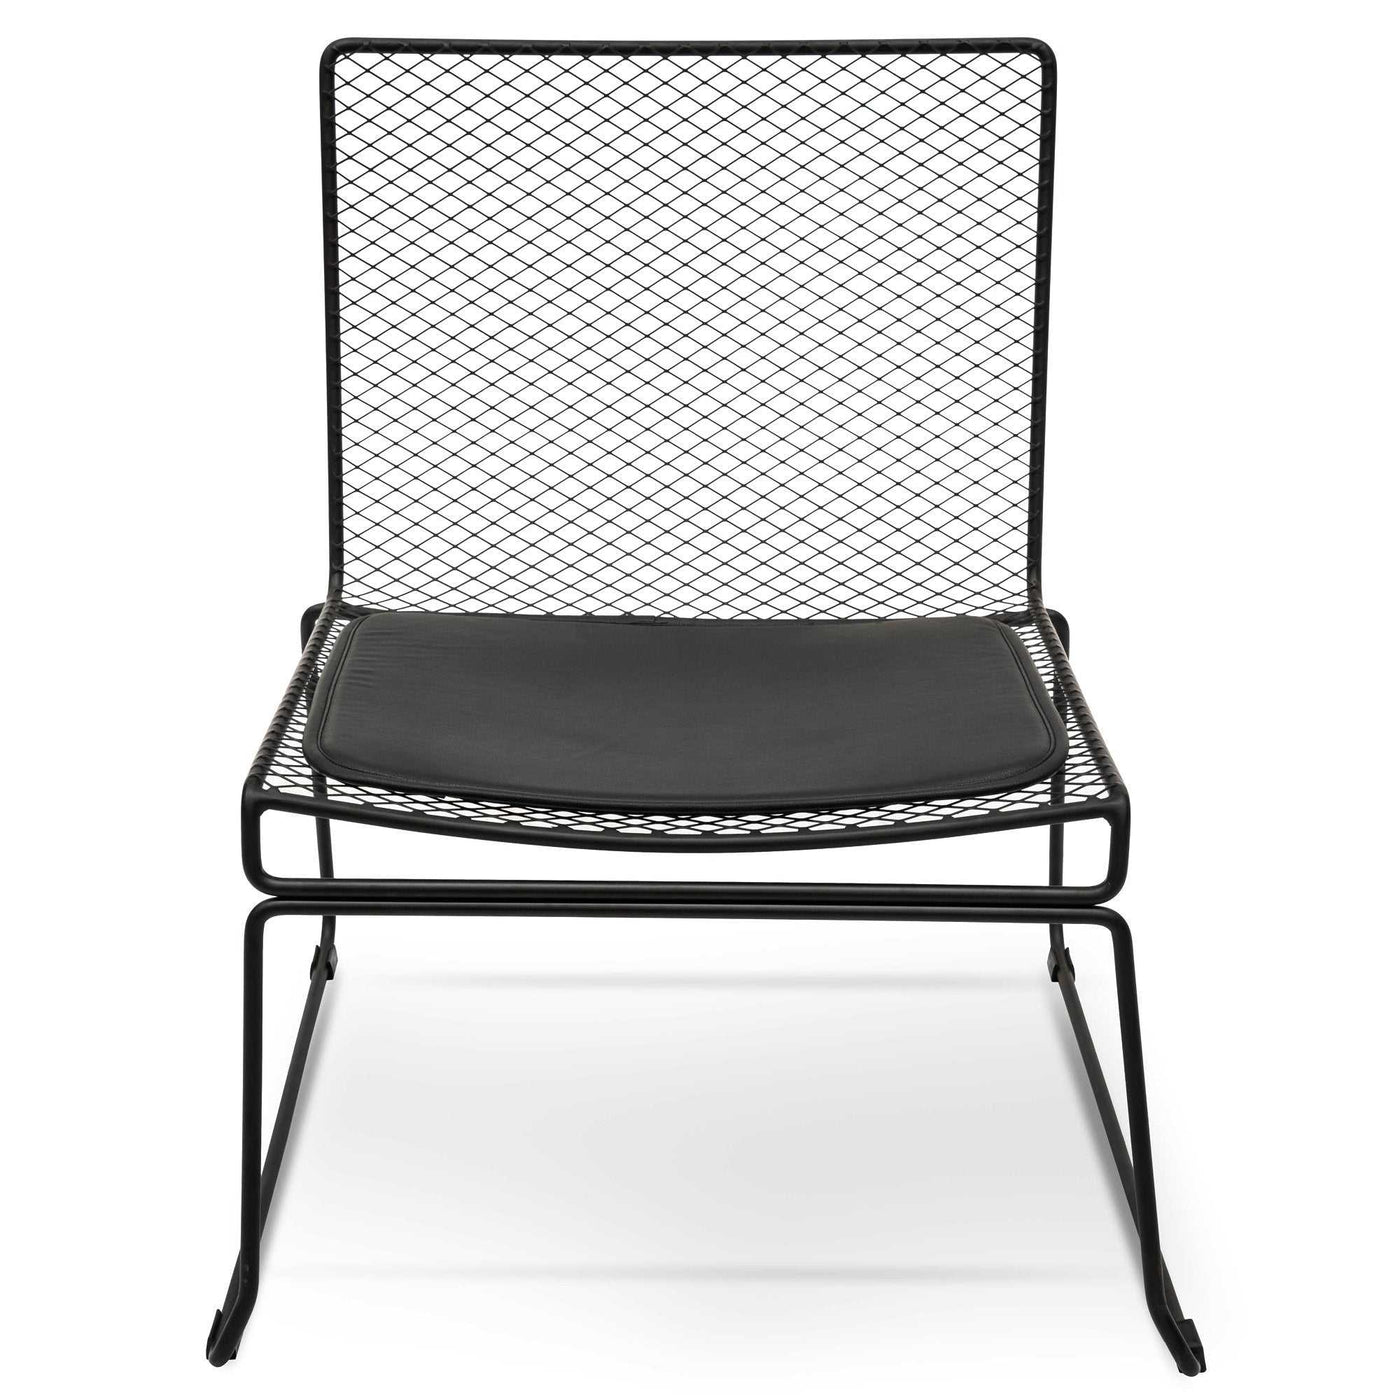 Lounge Chair With Light Grey Fabric Seat - Black Frame